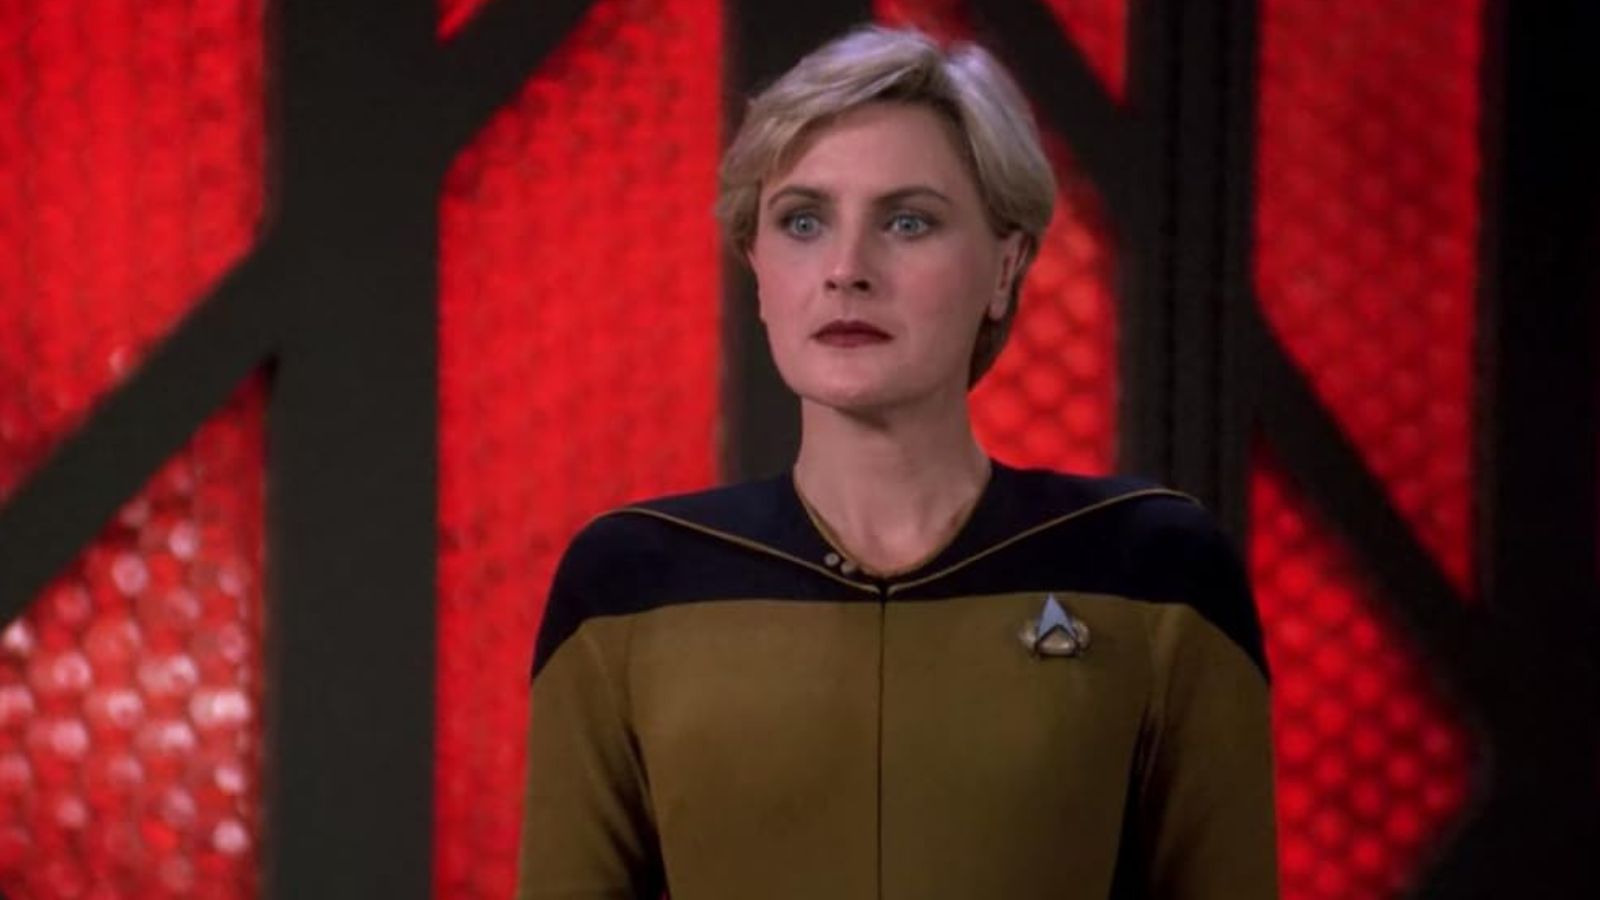 <span>As the Chief Security Officer aboard the USS Enterprise, she had every opportunity to win the hearts of Trekkies. The actress who played her had the charisma of a nat, so she was hard to invest in. The lack of character development might have offset her blandness.</span>